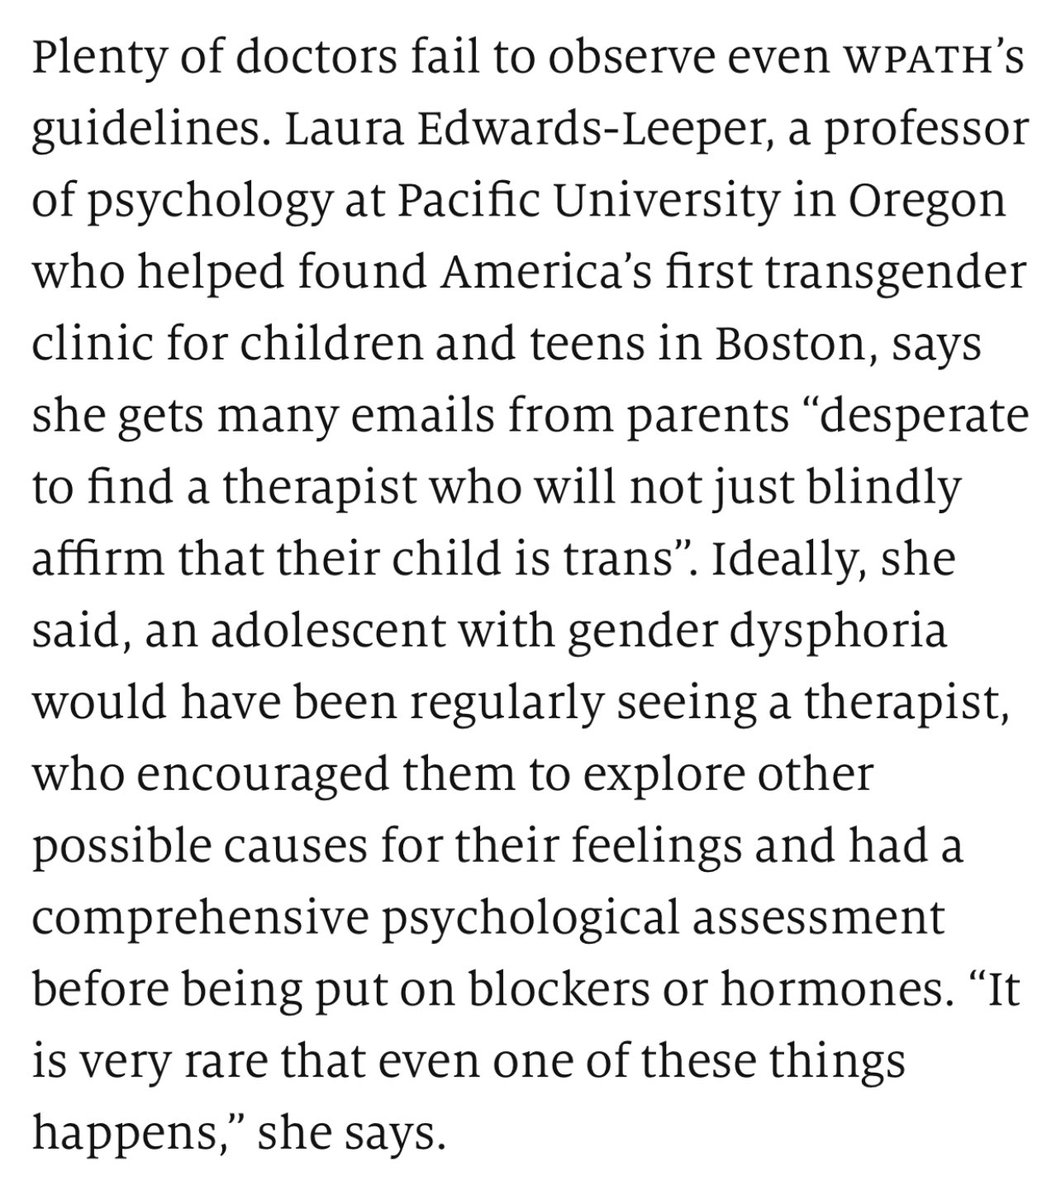 “Ideally, she said, an adolescent with gender dysphoria would have been regularly seeing a therapist, who encouraged them to explore other possible causes for their feelings and had a comprehensive psychological assessment before being put on blockers or hormones.”